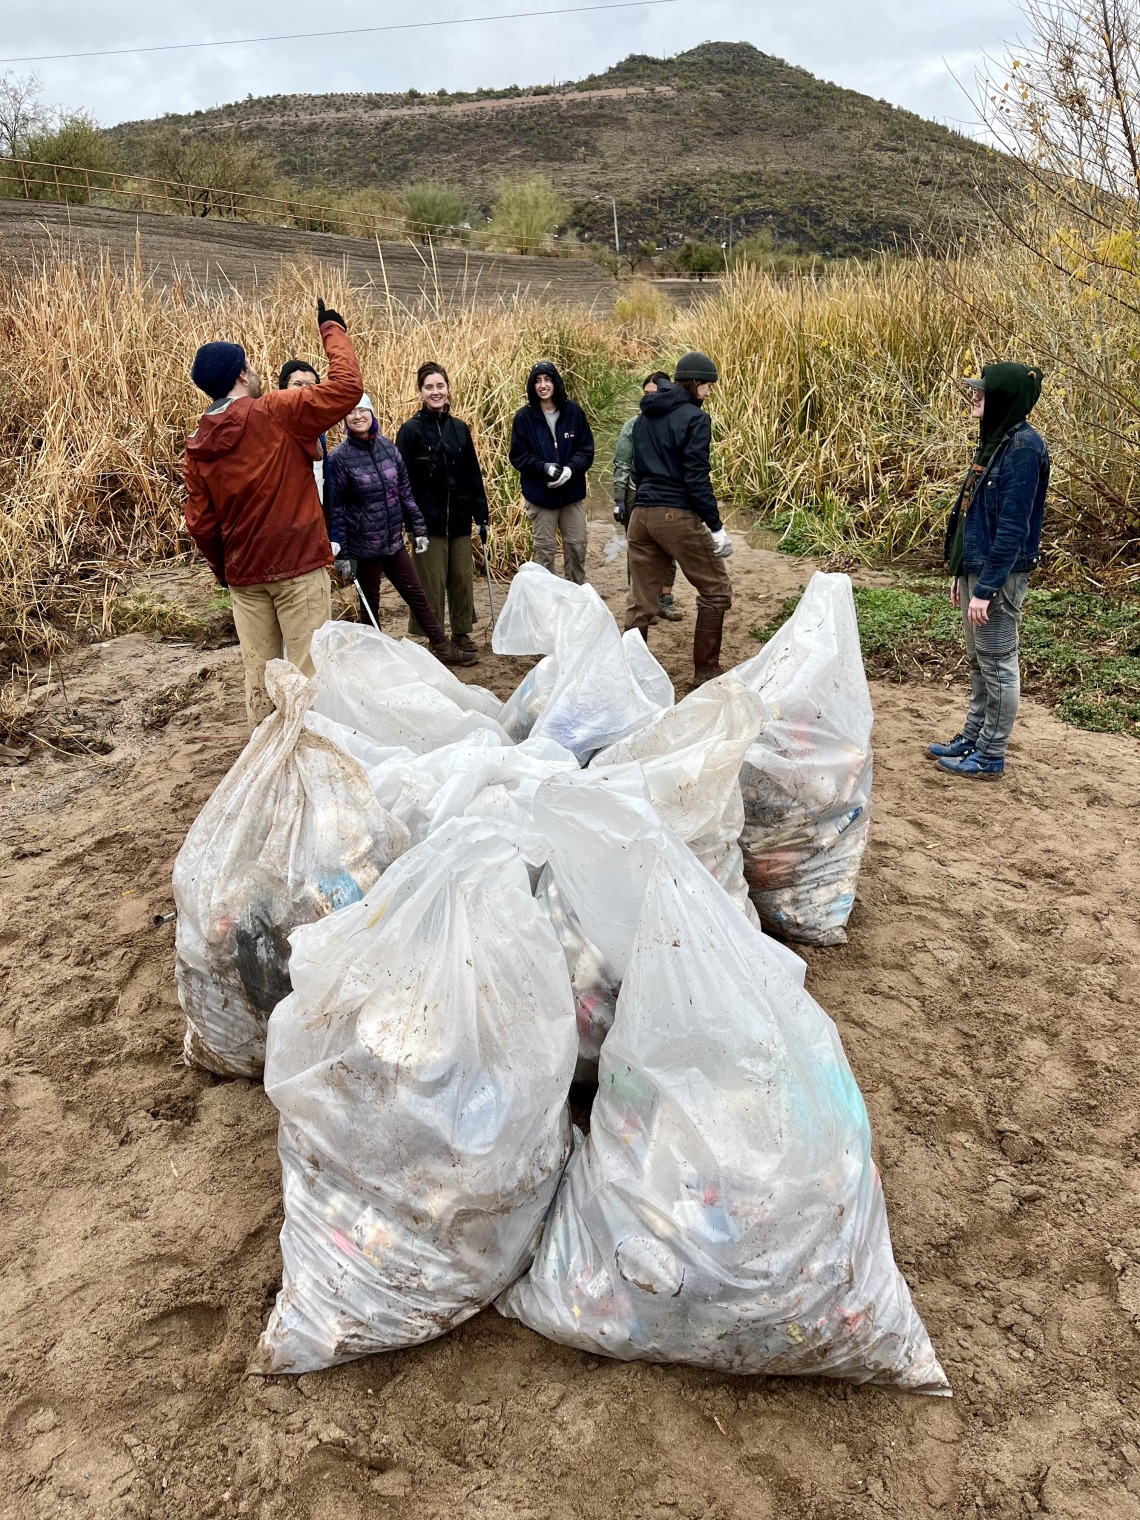 Group of people standing near white trash bags